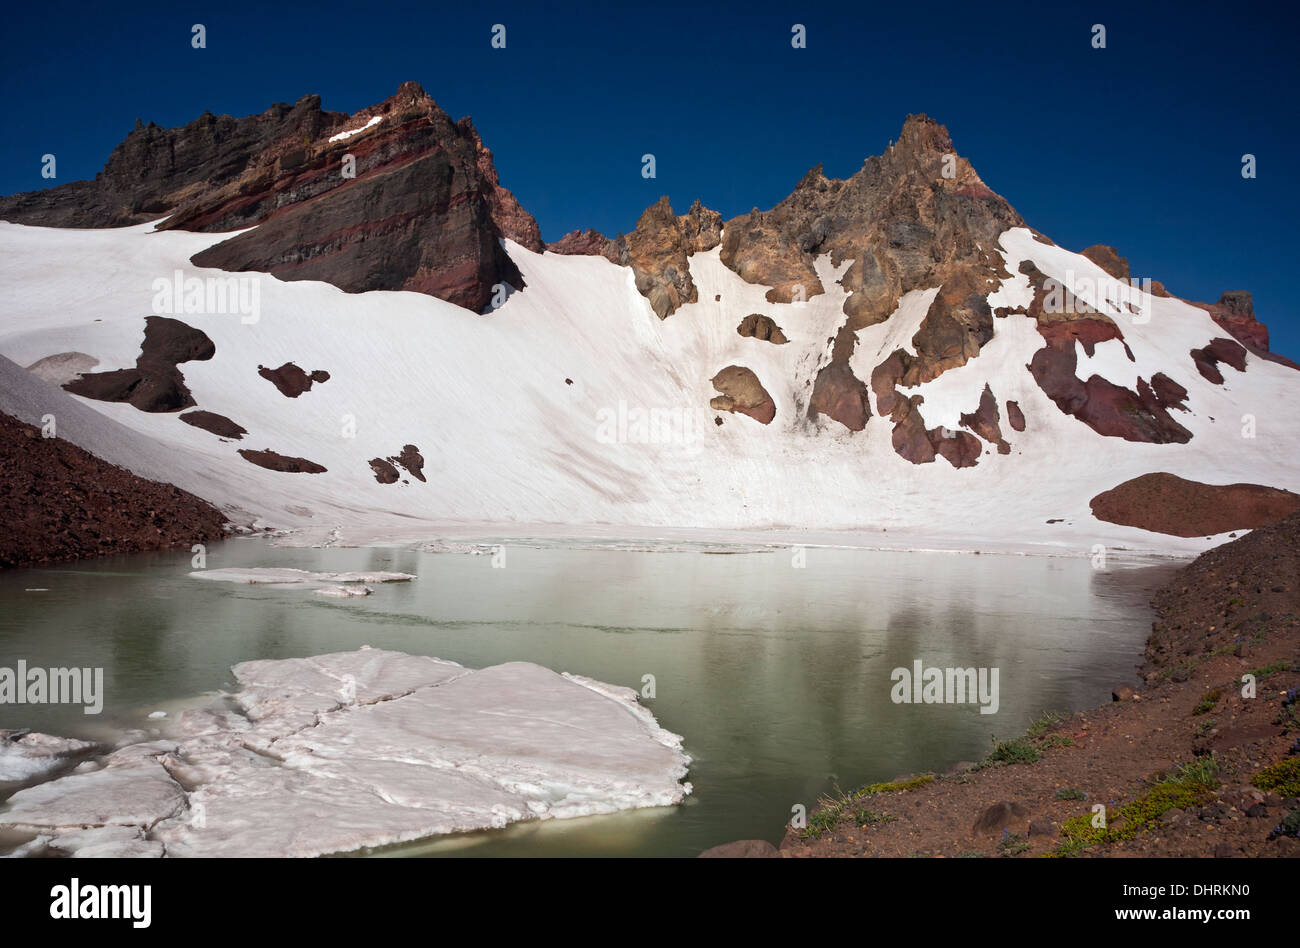 OREGON - Ice and snow covered Crater Lake on the side of Broken Top in the Three Sisters Wilderness area. Stock Photo